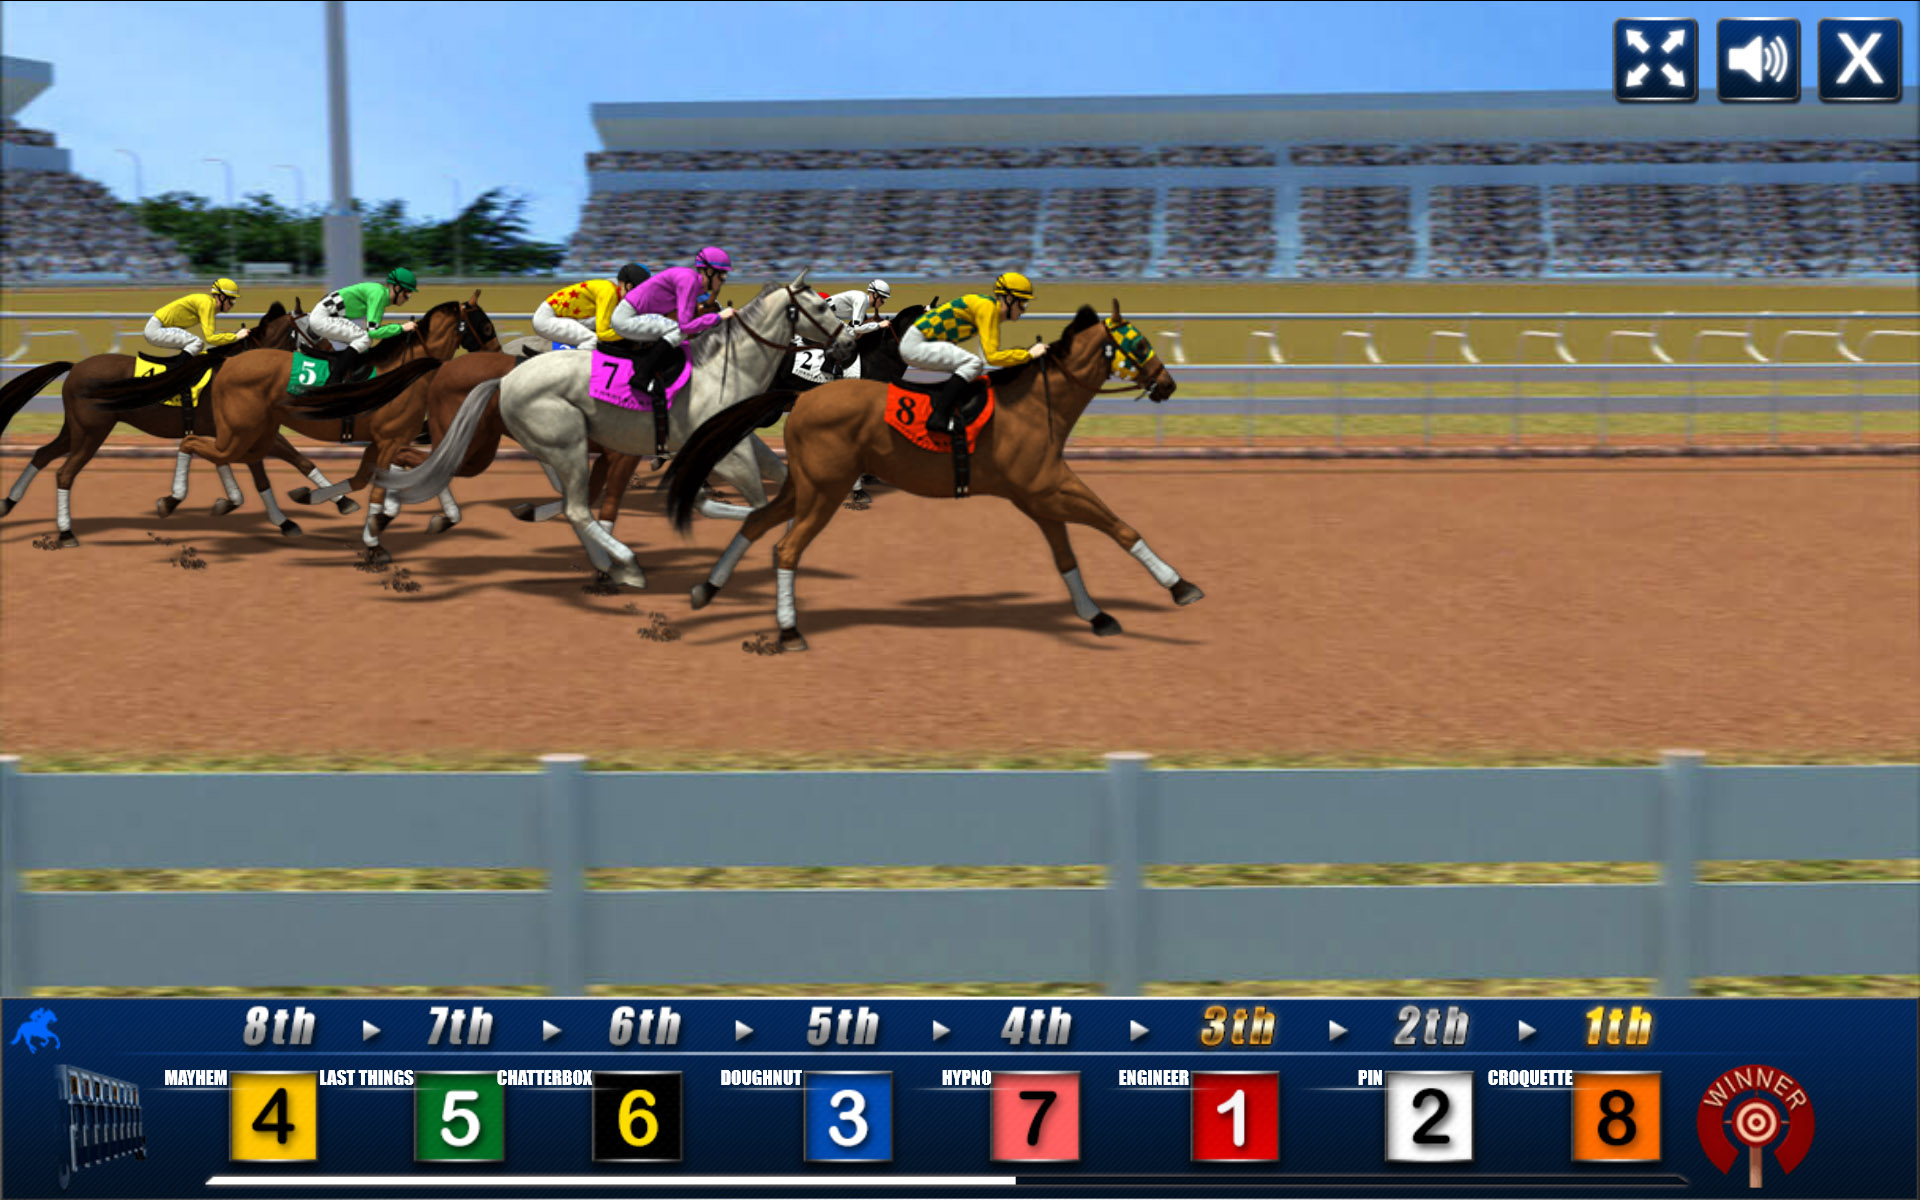 Online Horse Racing Games: Some issues